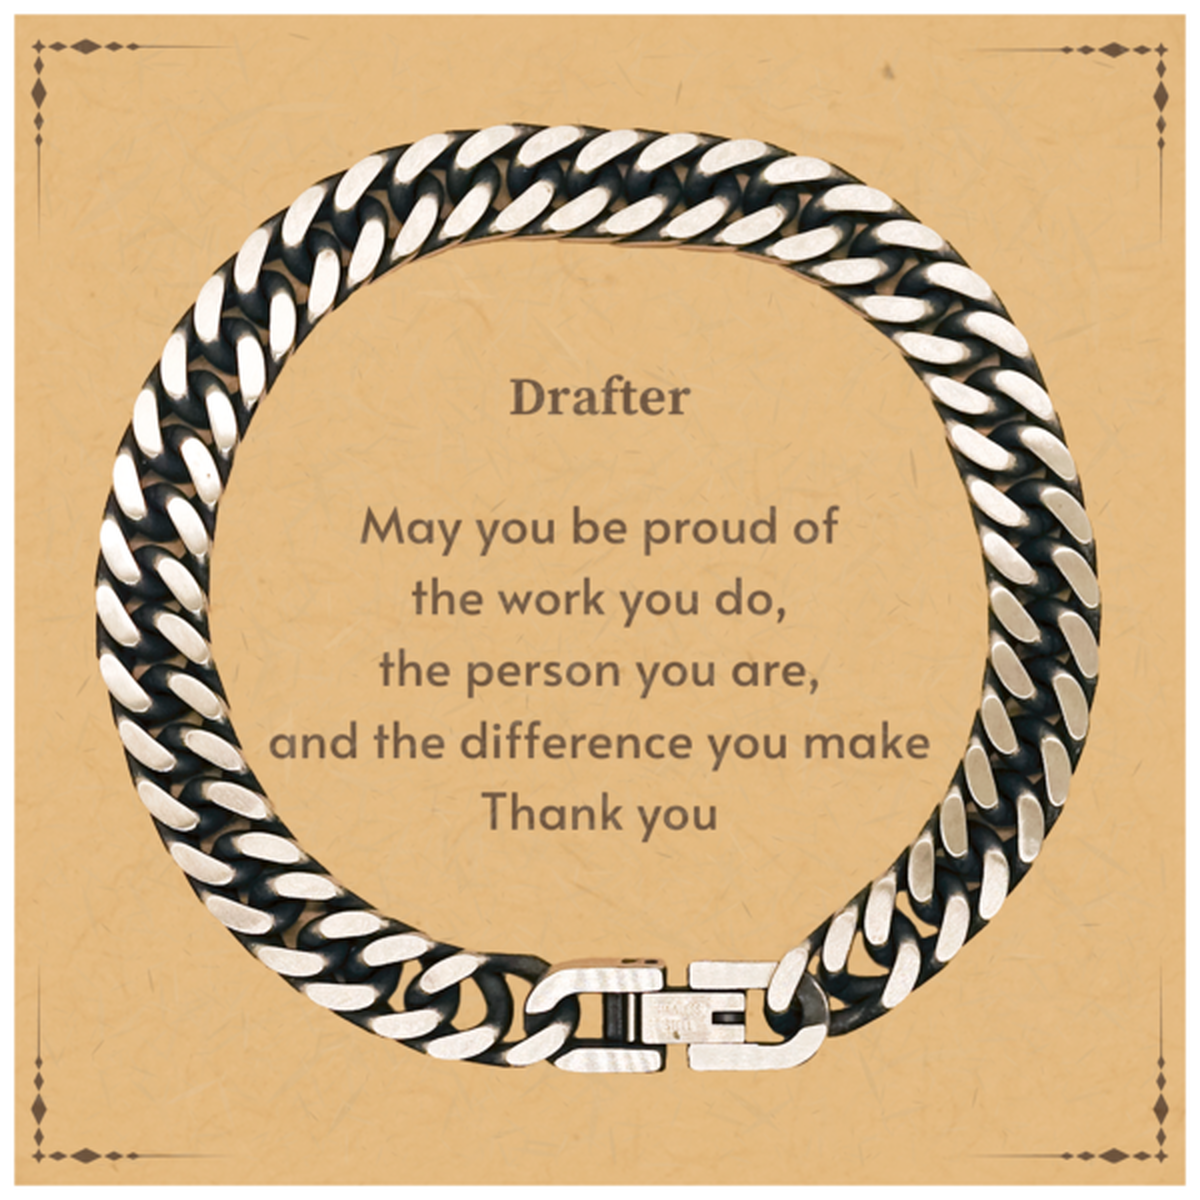 Heartwarming Cuban Link Chain Bracelet Retirement Coworkers Gifts for Drafter, Drafter May You be proud of the work you do, the person you are Gifts for Boss Men Women Friends